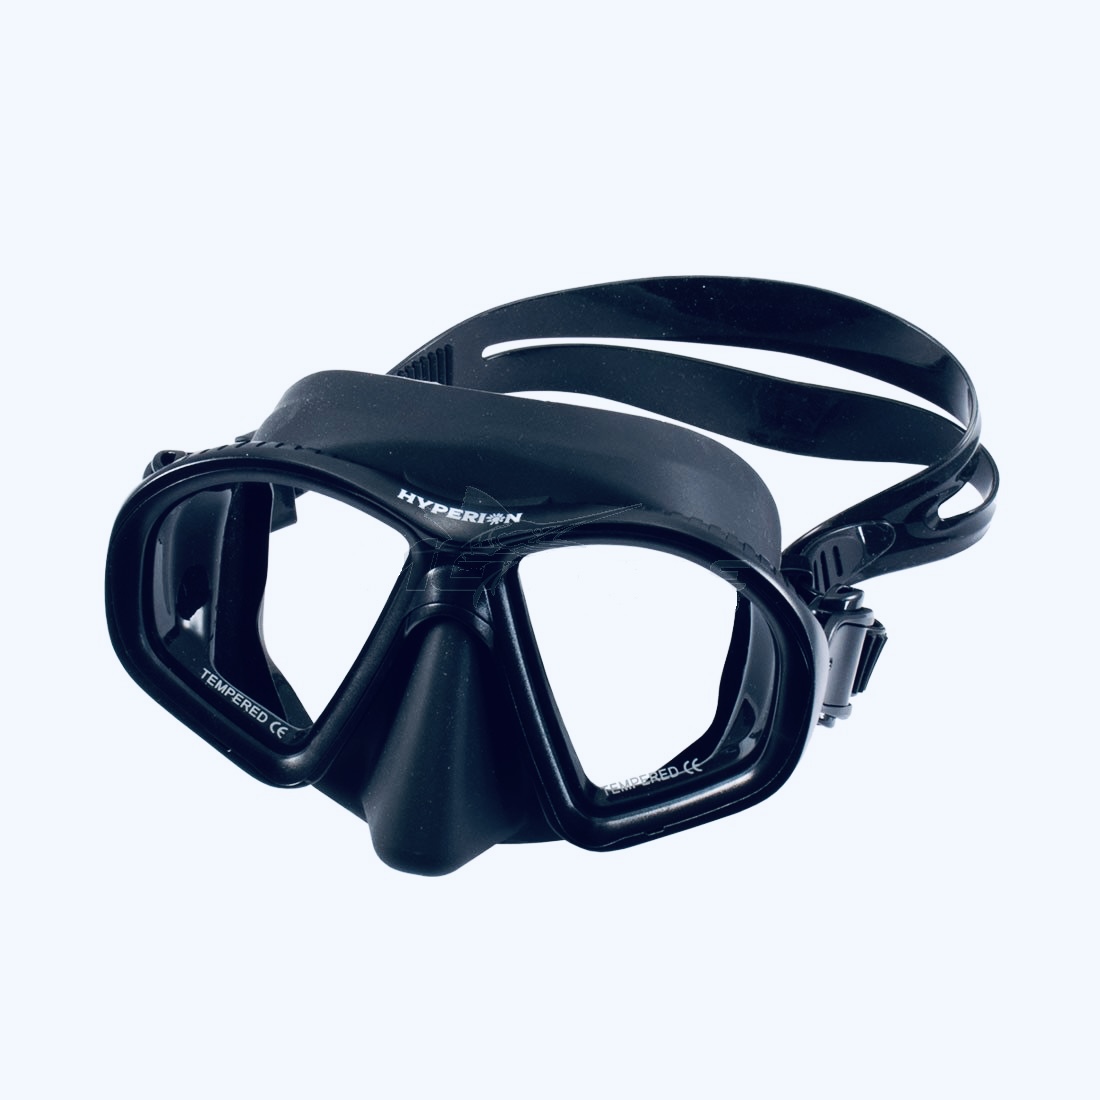 Hyperion Mako Mask and Freedive Snorkel